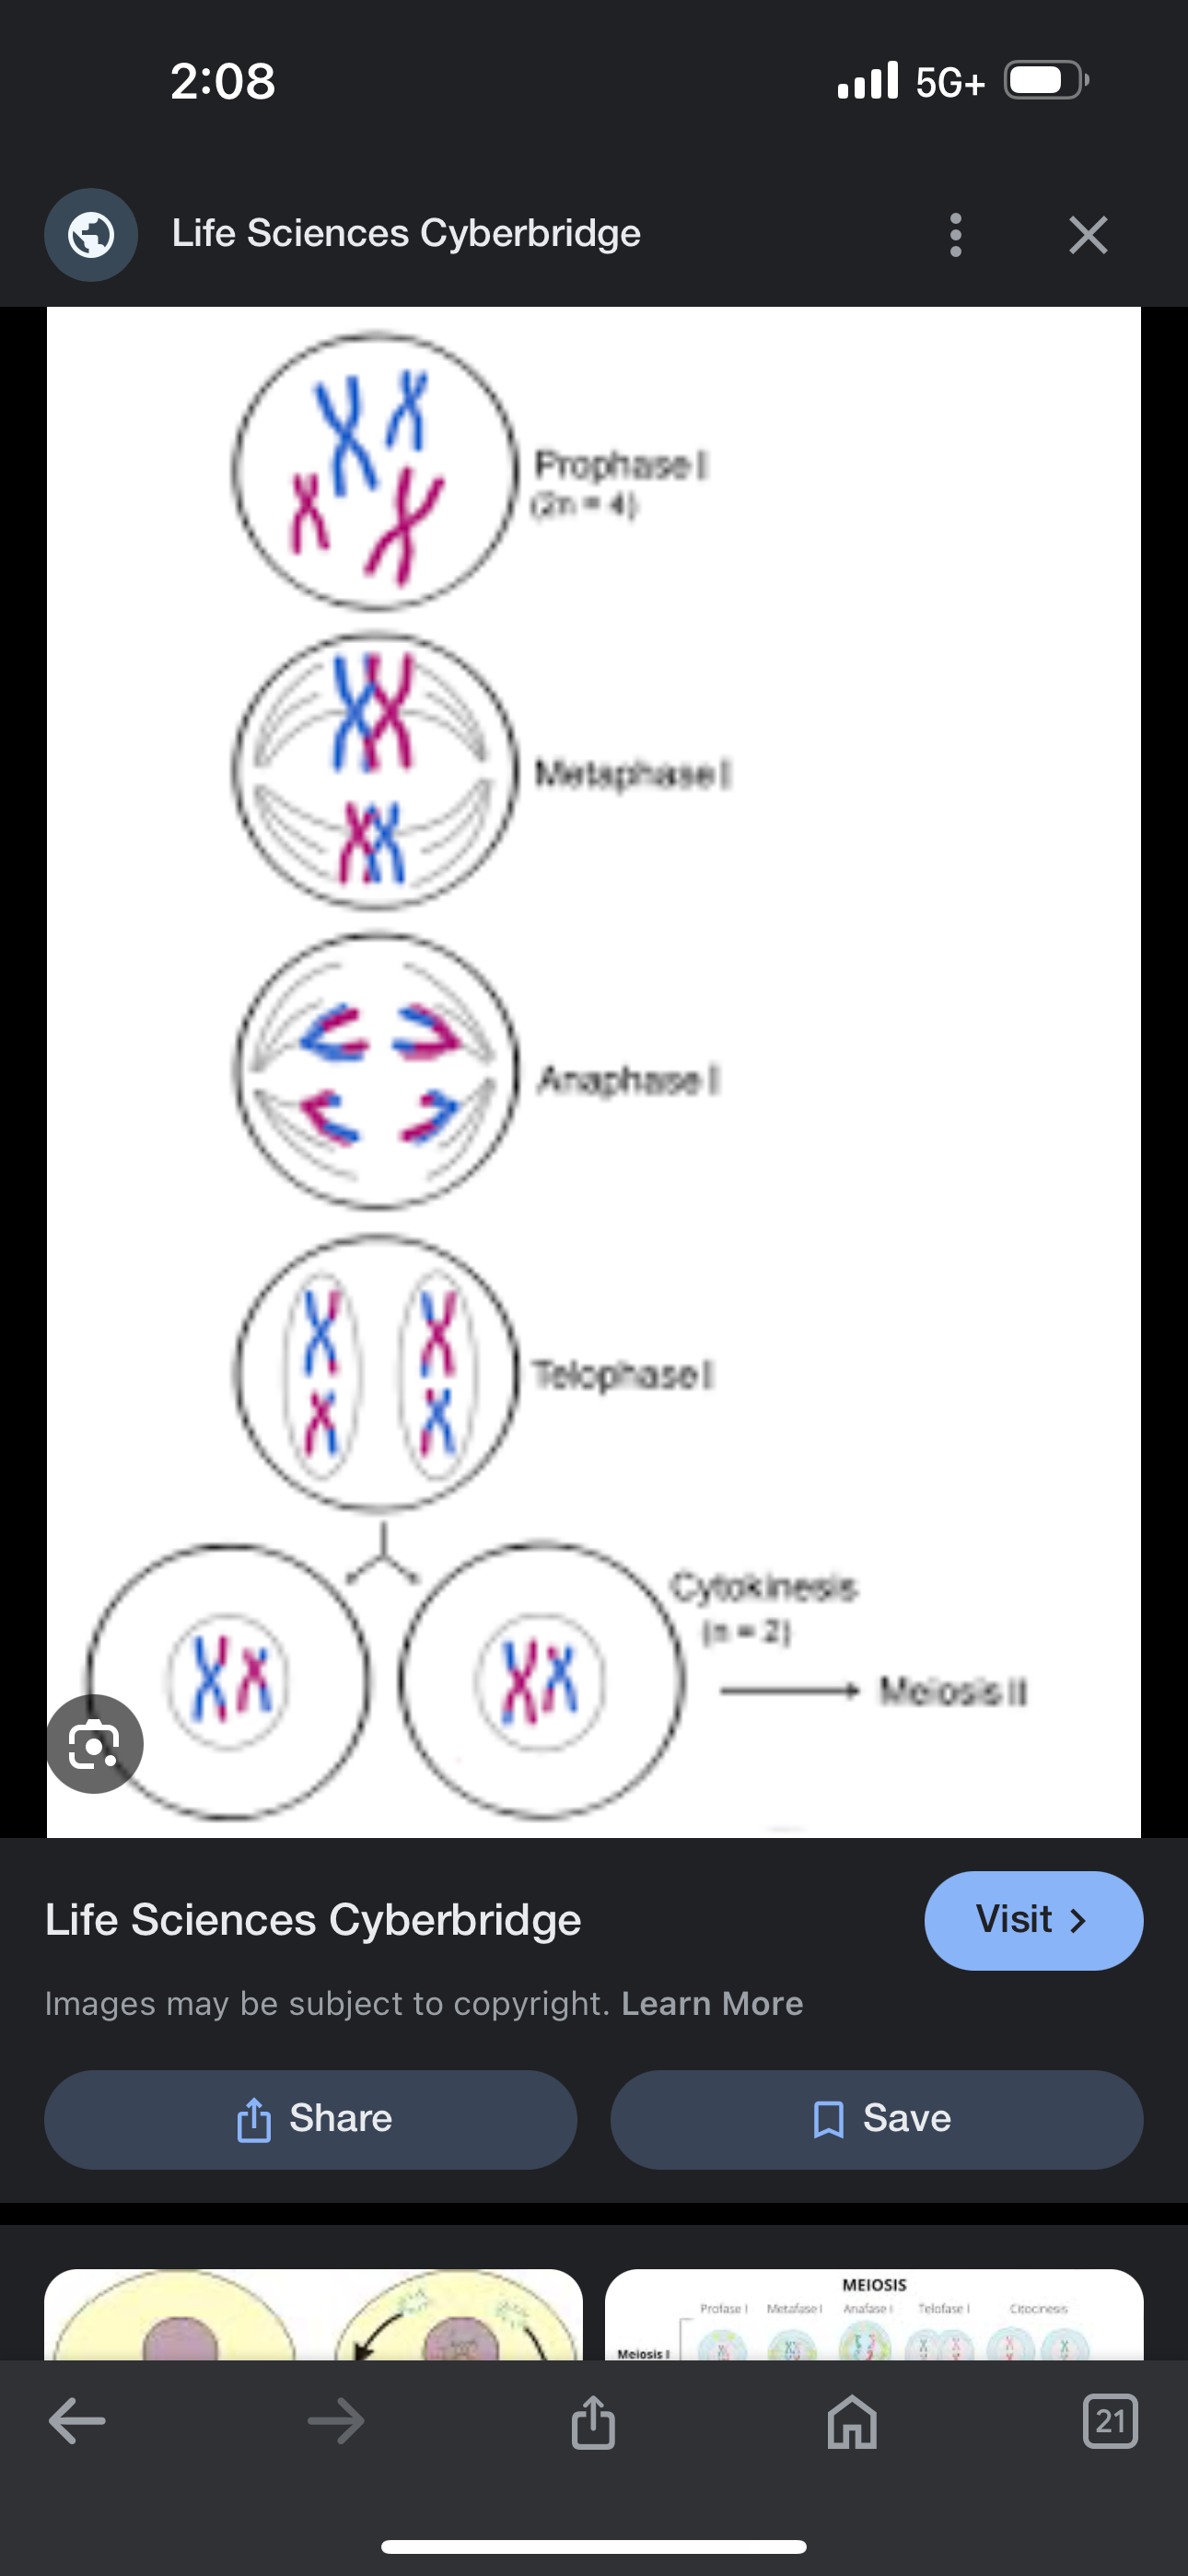 <p>Prophase 1- chromosome thicken</p><p>Metaphase 1- tetrads migrate toward middle</p><p>Anaphase 1- homologous chromosomes separate and move towards opposite sides</p><p>Telophase 1- cells now haploid, nuclear membrane begins to form</p><p></p><p></p>